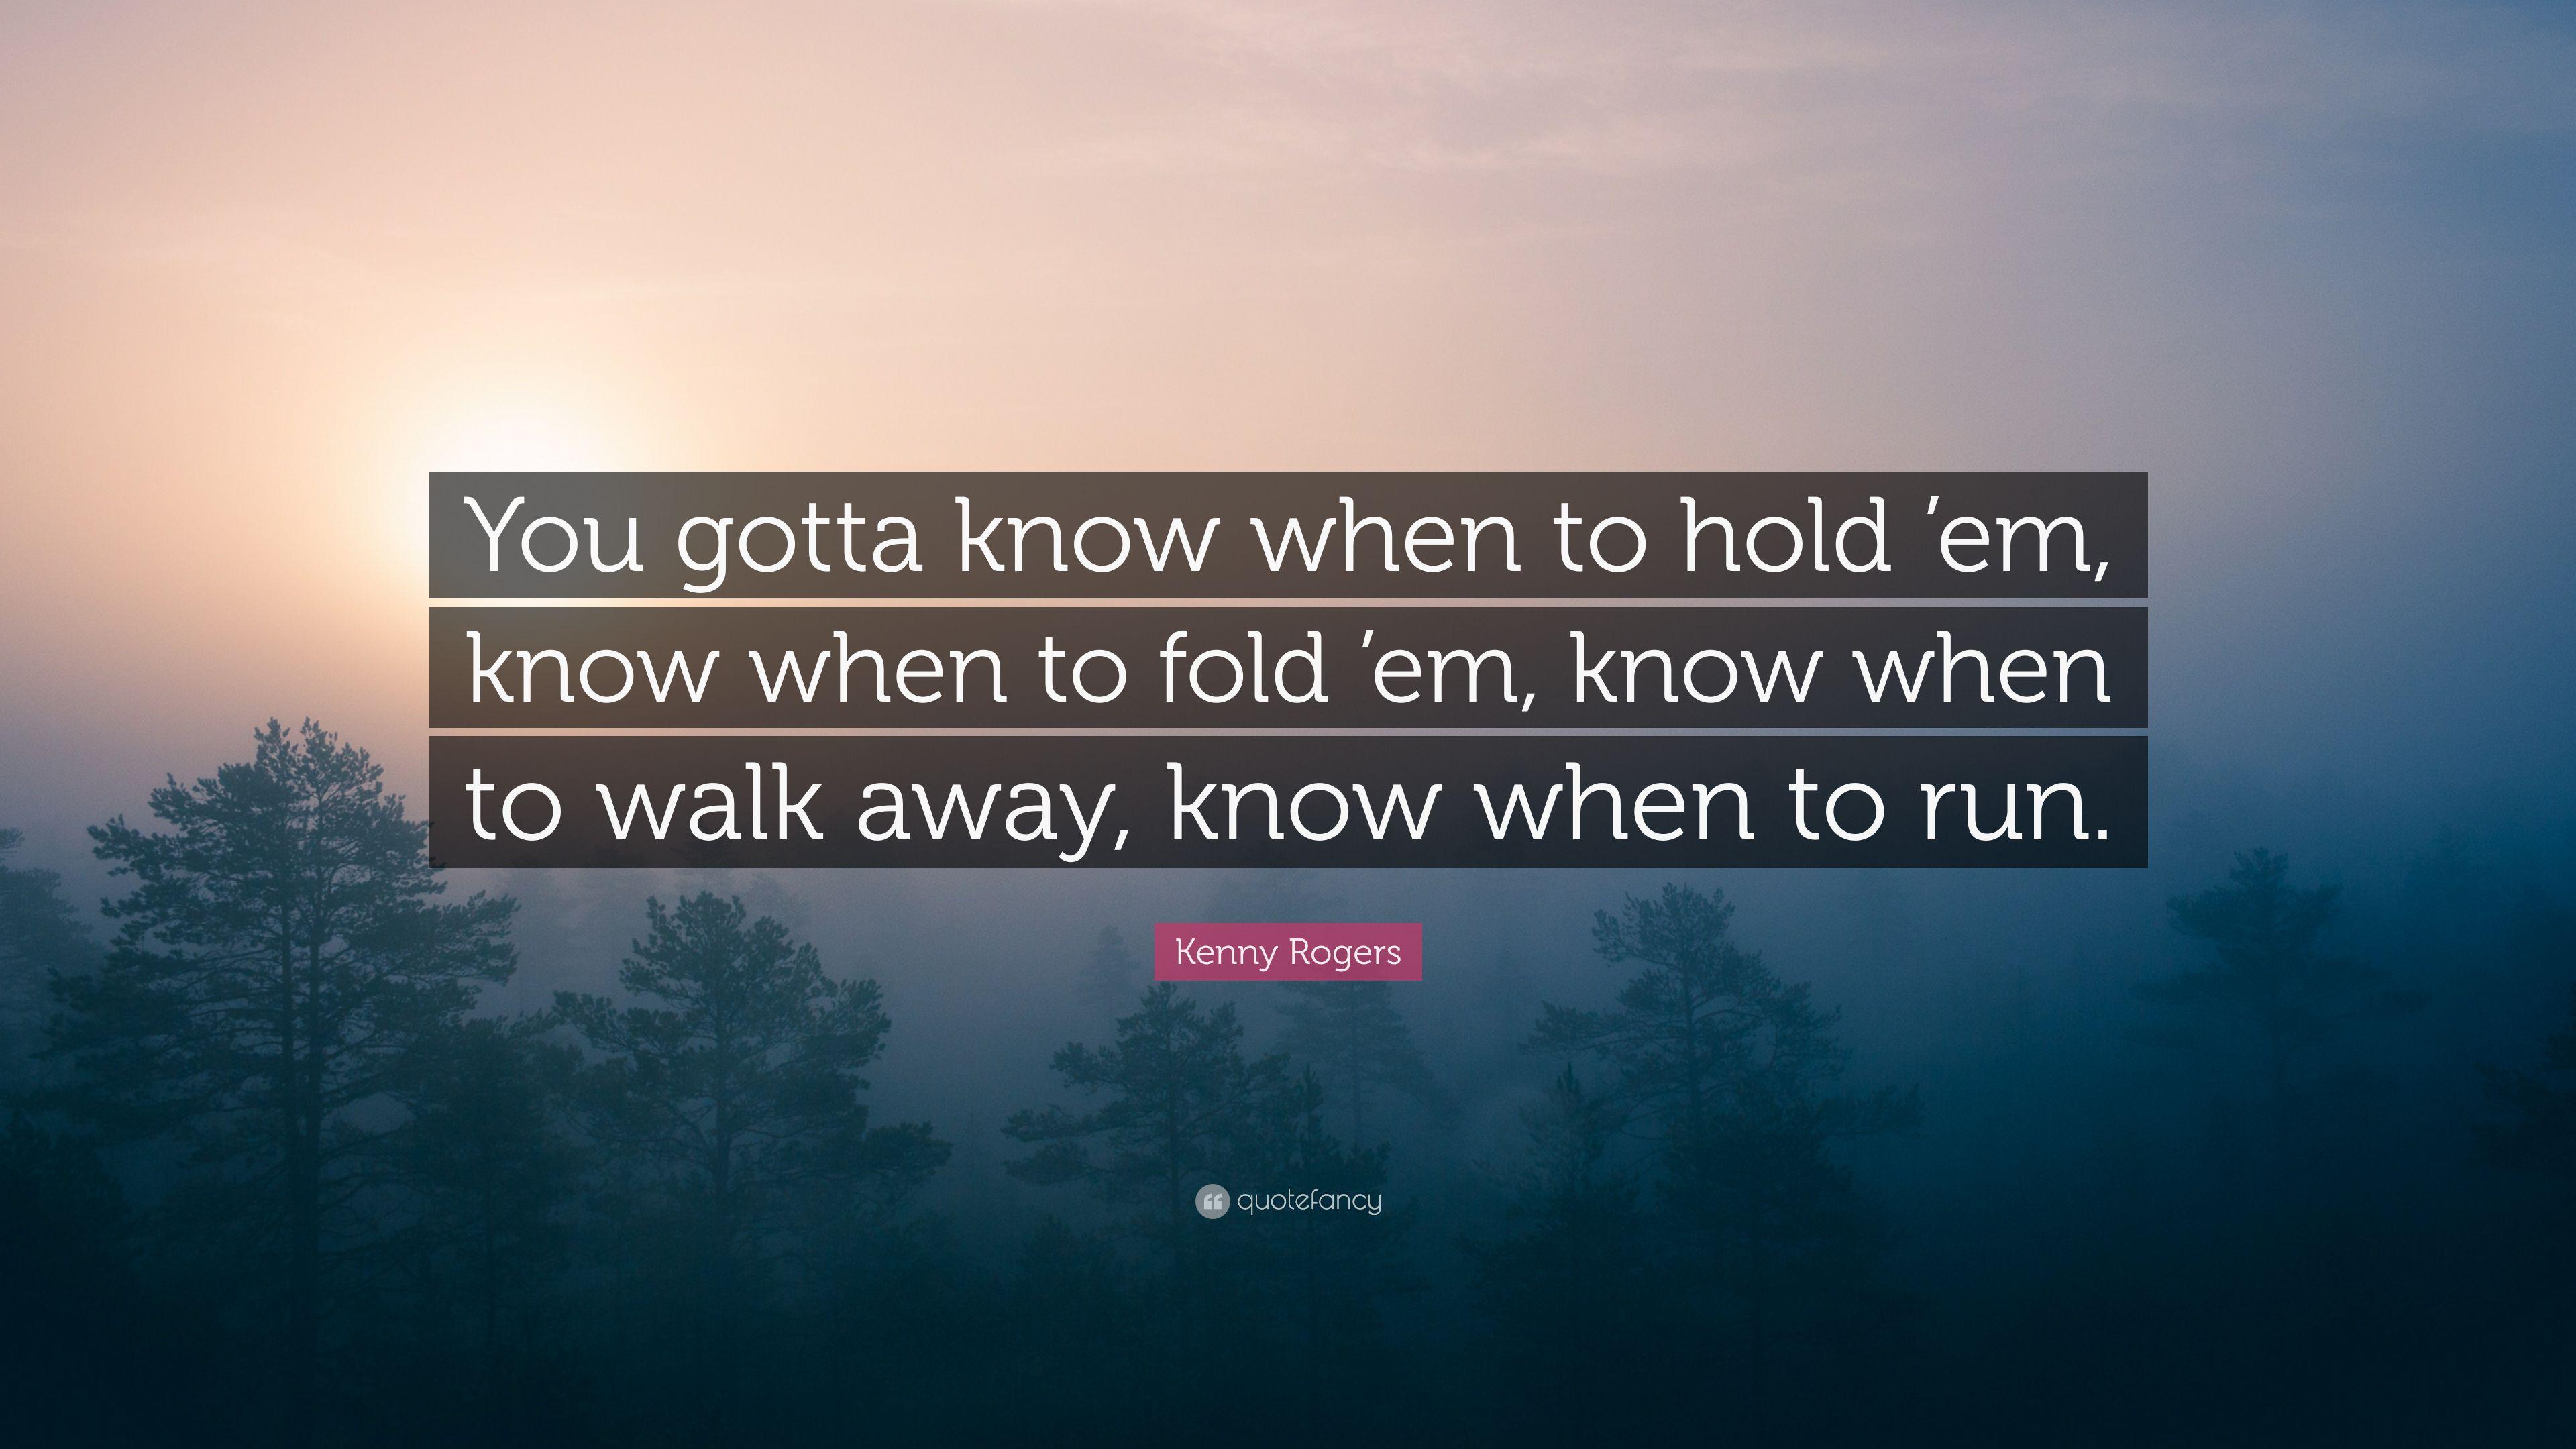 Kenny Rogers Quote: “You gotta know when to hold 'em, know when to